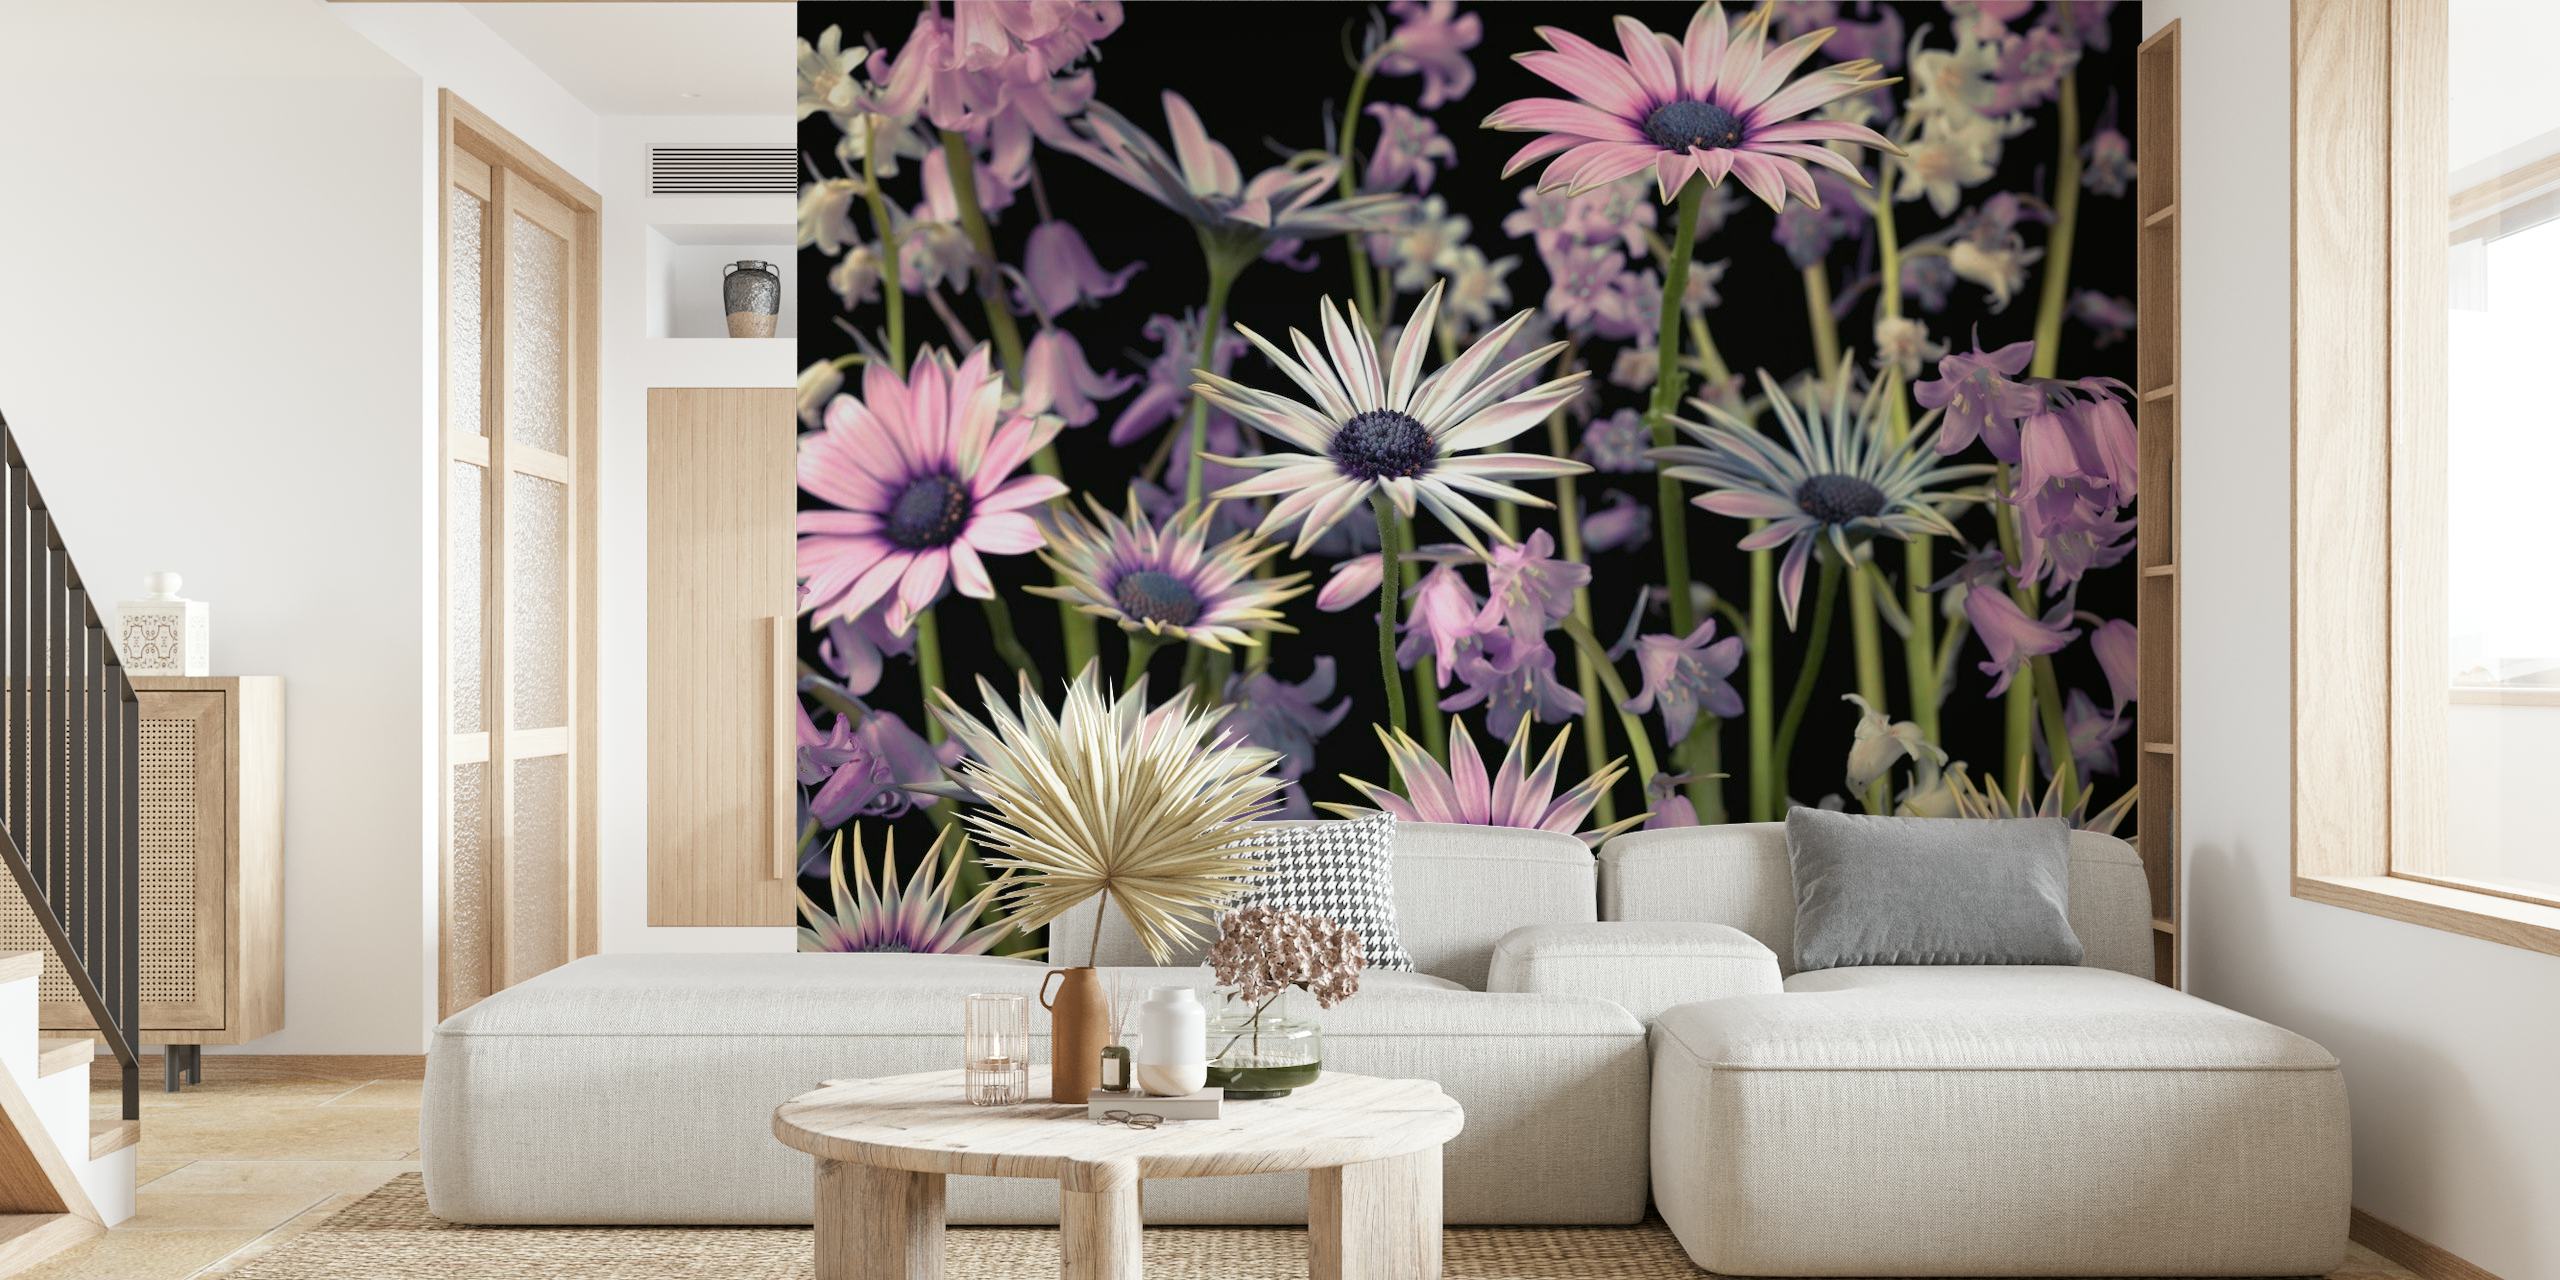 Meadow flowers wall mural with pink and purple wildflowers against a dark background